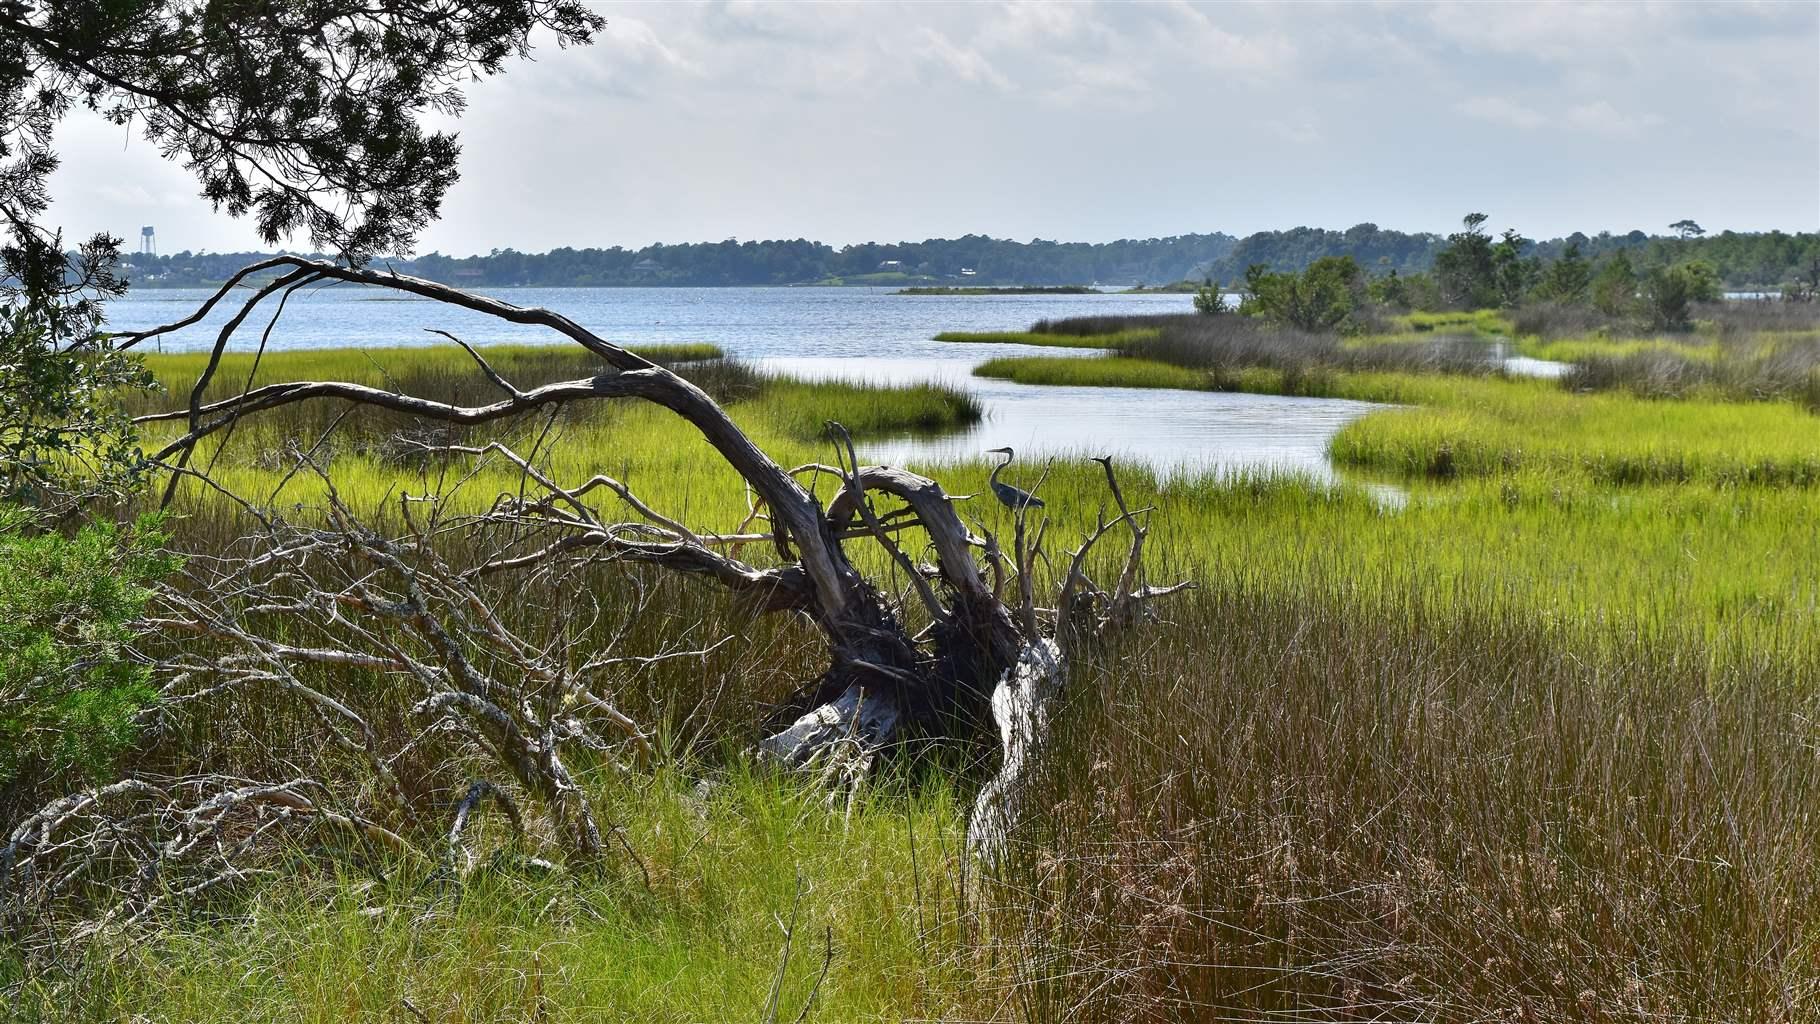 A heron stands on the decaying remnants of a tree, lying among tall grasses and reeds along the edge of a calm inlet. The water extends toward the horizon, where it meets a treed shoreline. The sky above is light gray and thick with clouds.